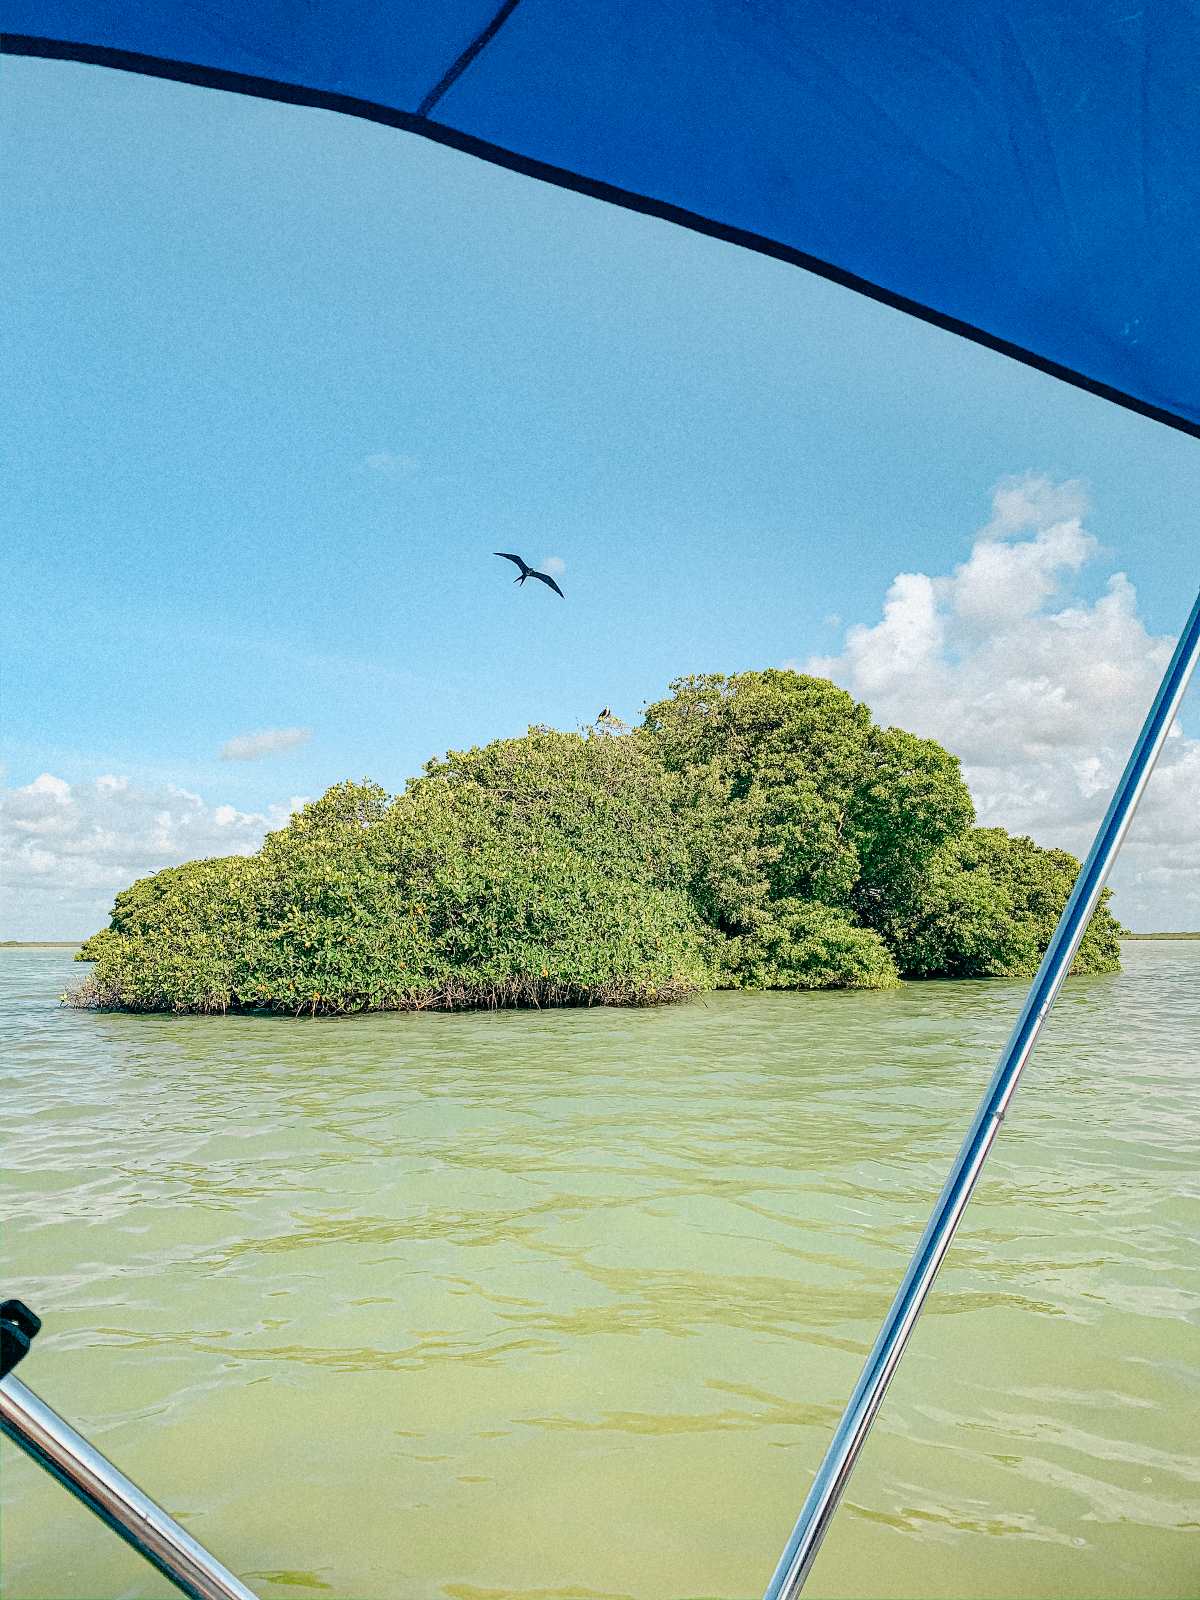 A green island view off the boat at the Sian Kaan Biosphere.